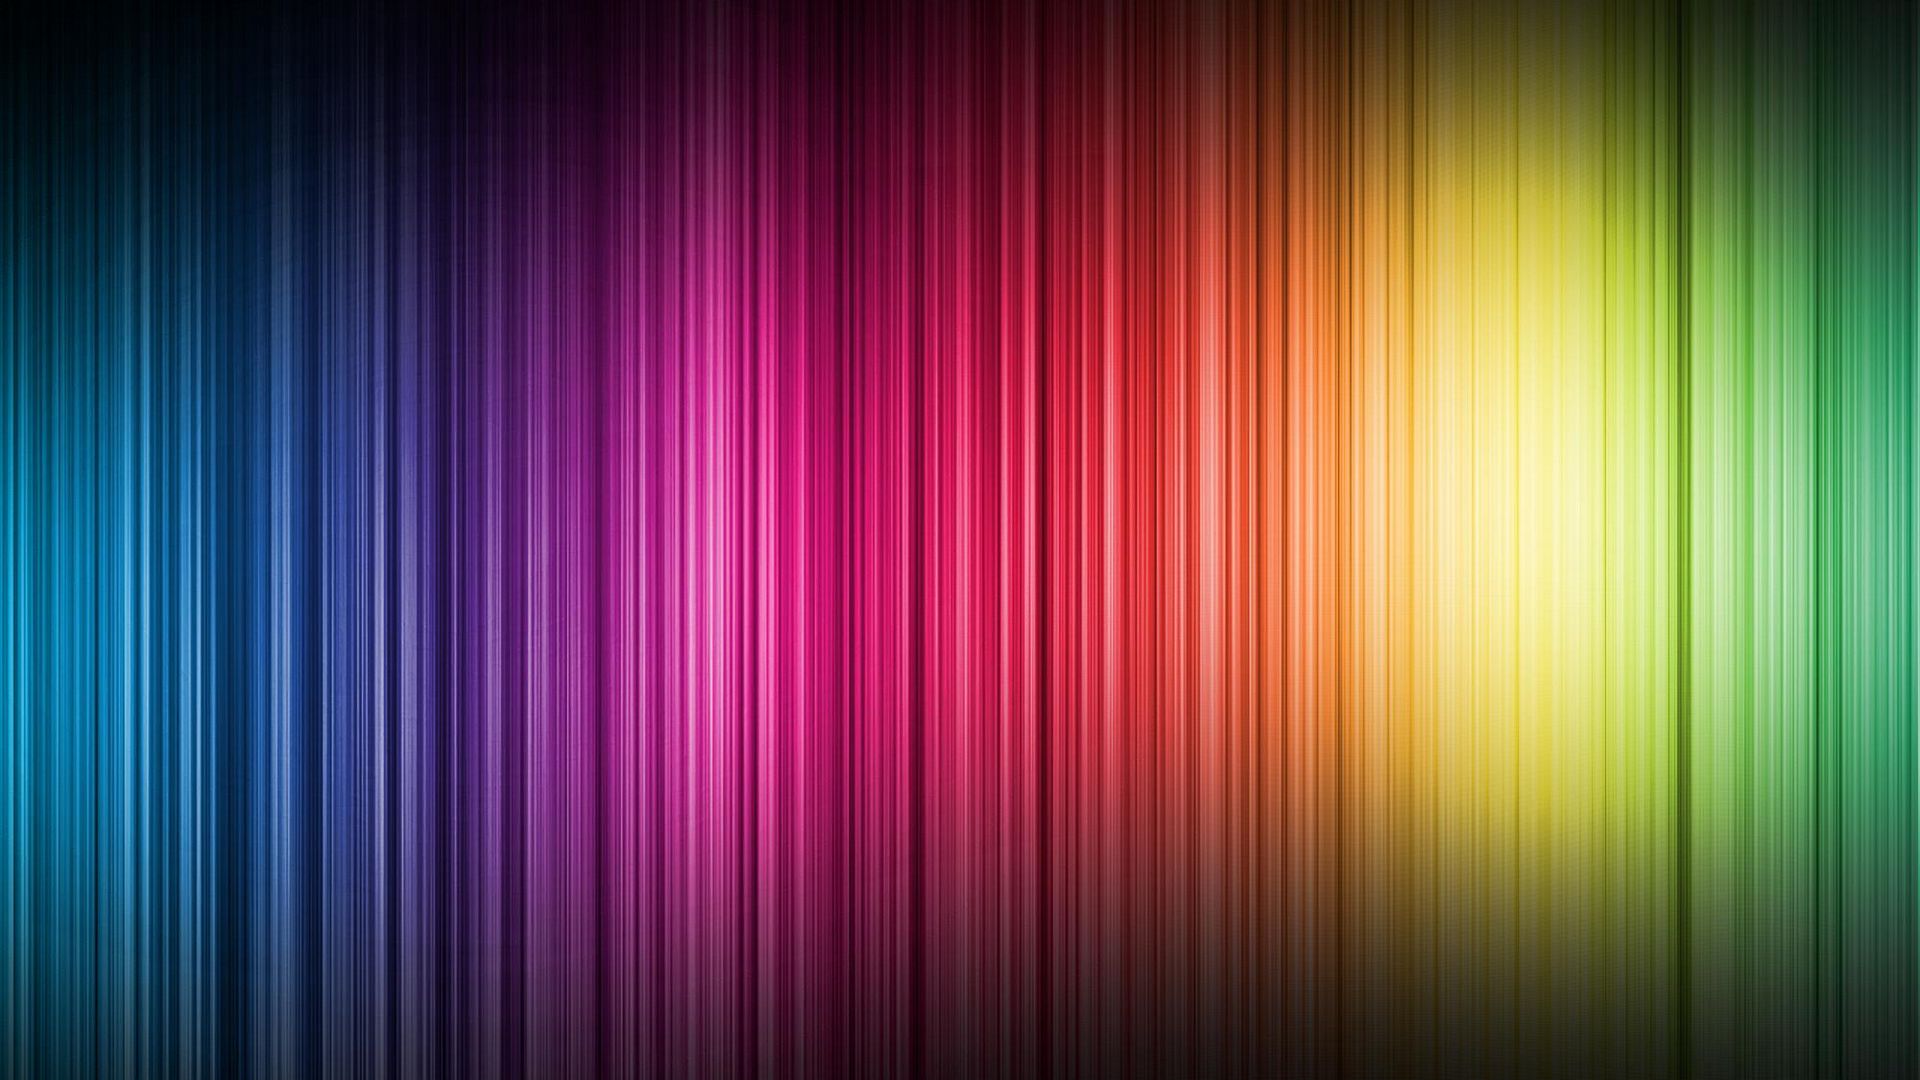 Download wallpaper 1920x1080 color, spectrum, bands, vertical full hd,  hdtv, fhd, 1080p hd background